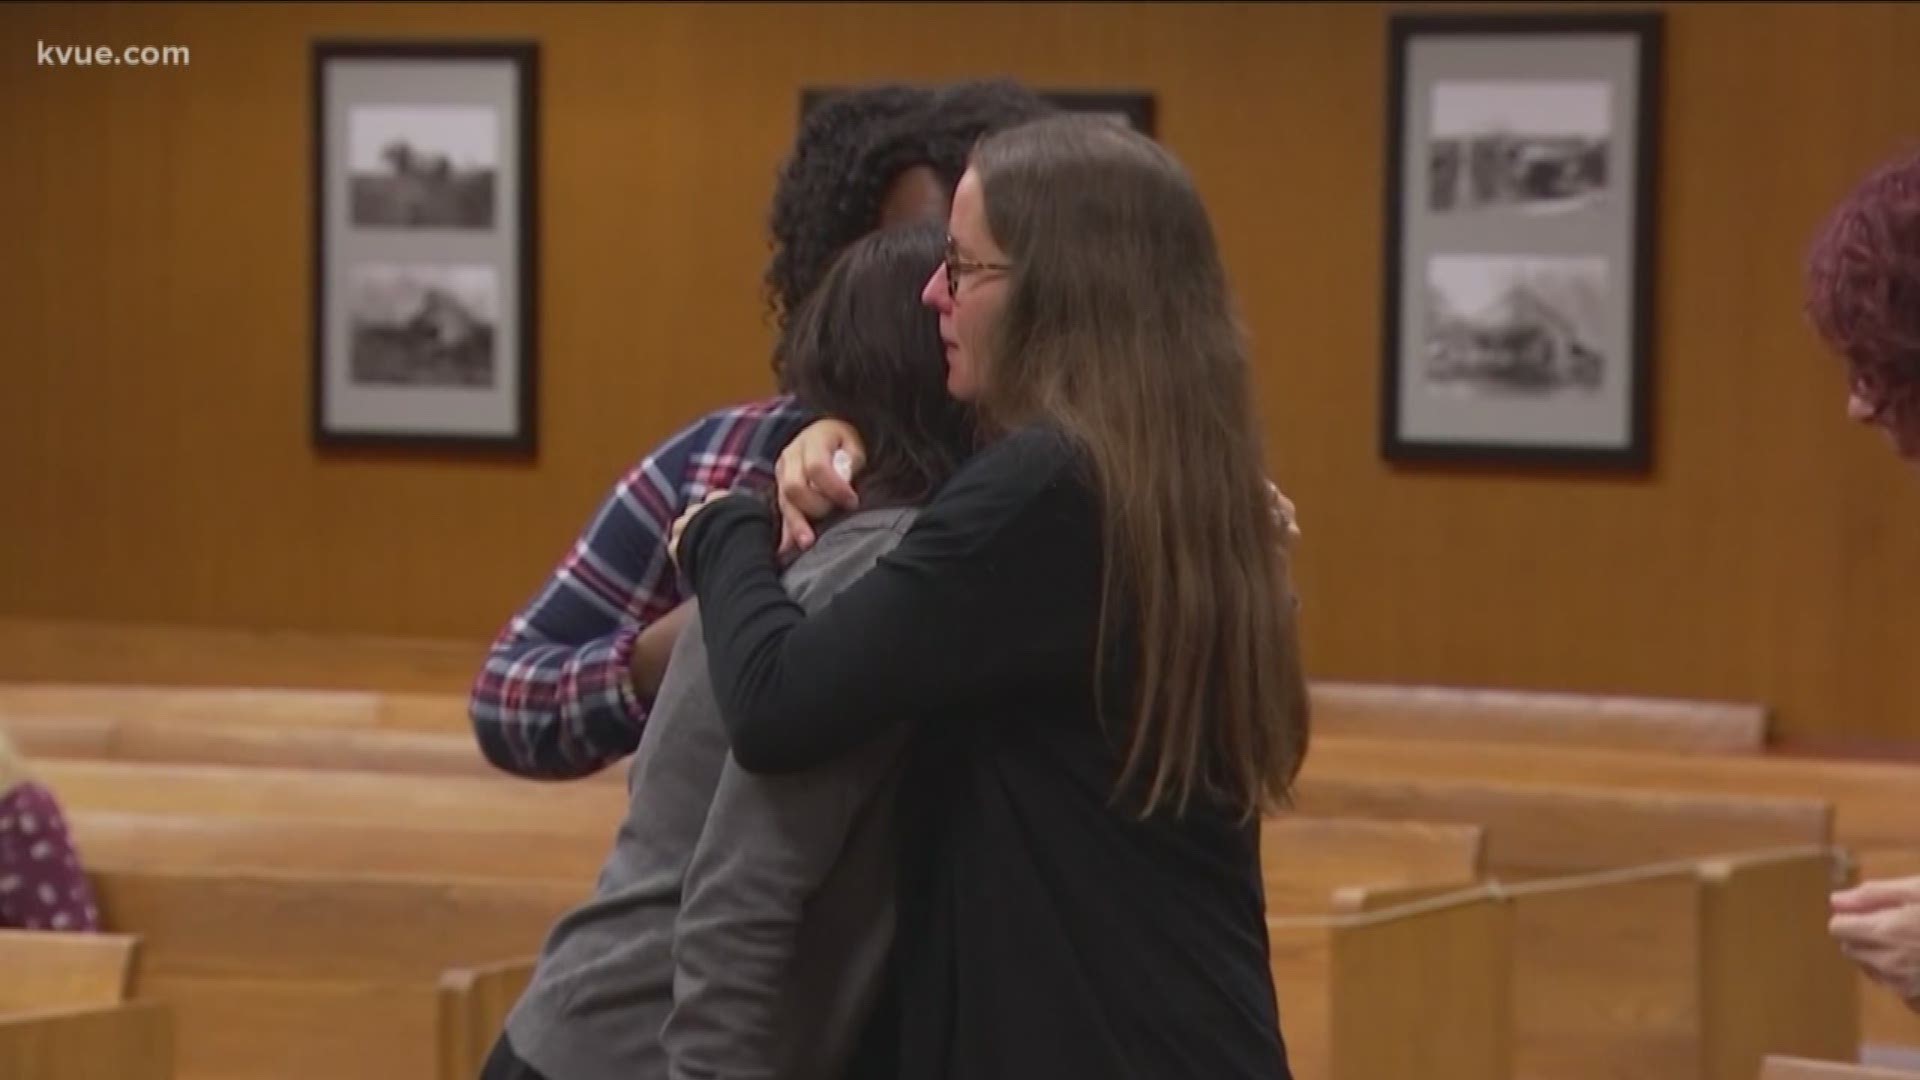 It was an emotional day in court in Georgetown on Monday.